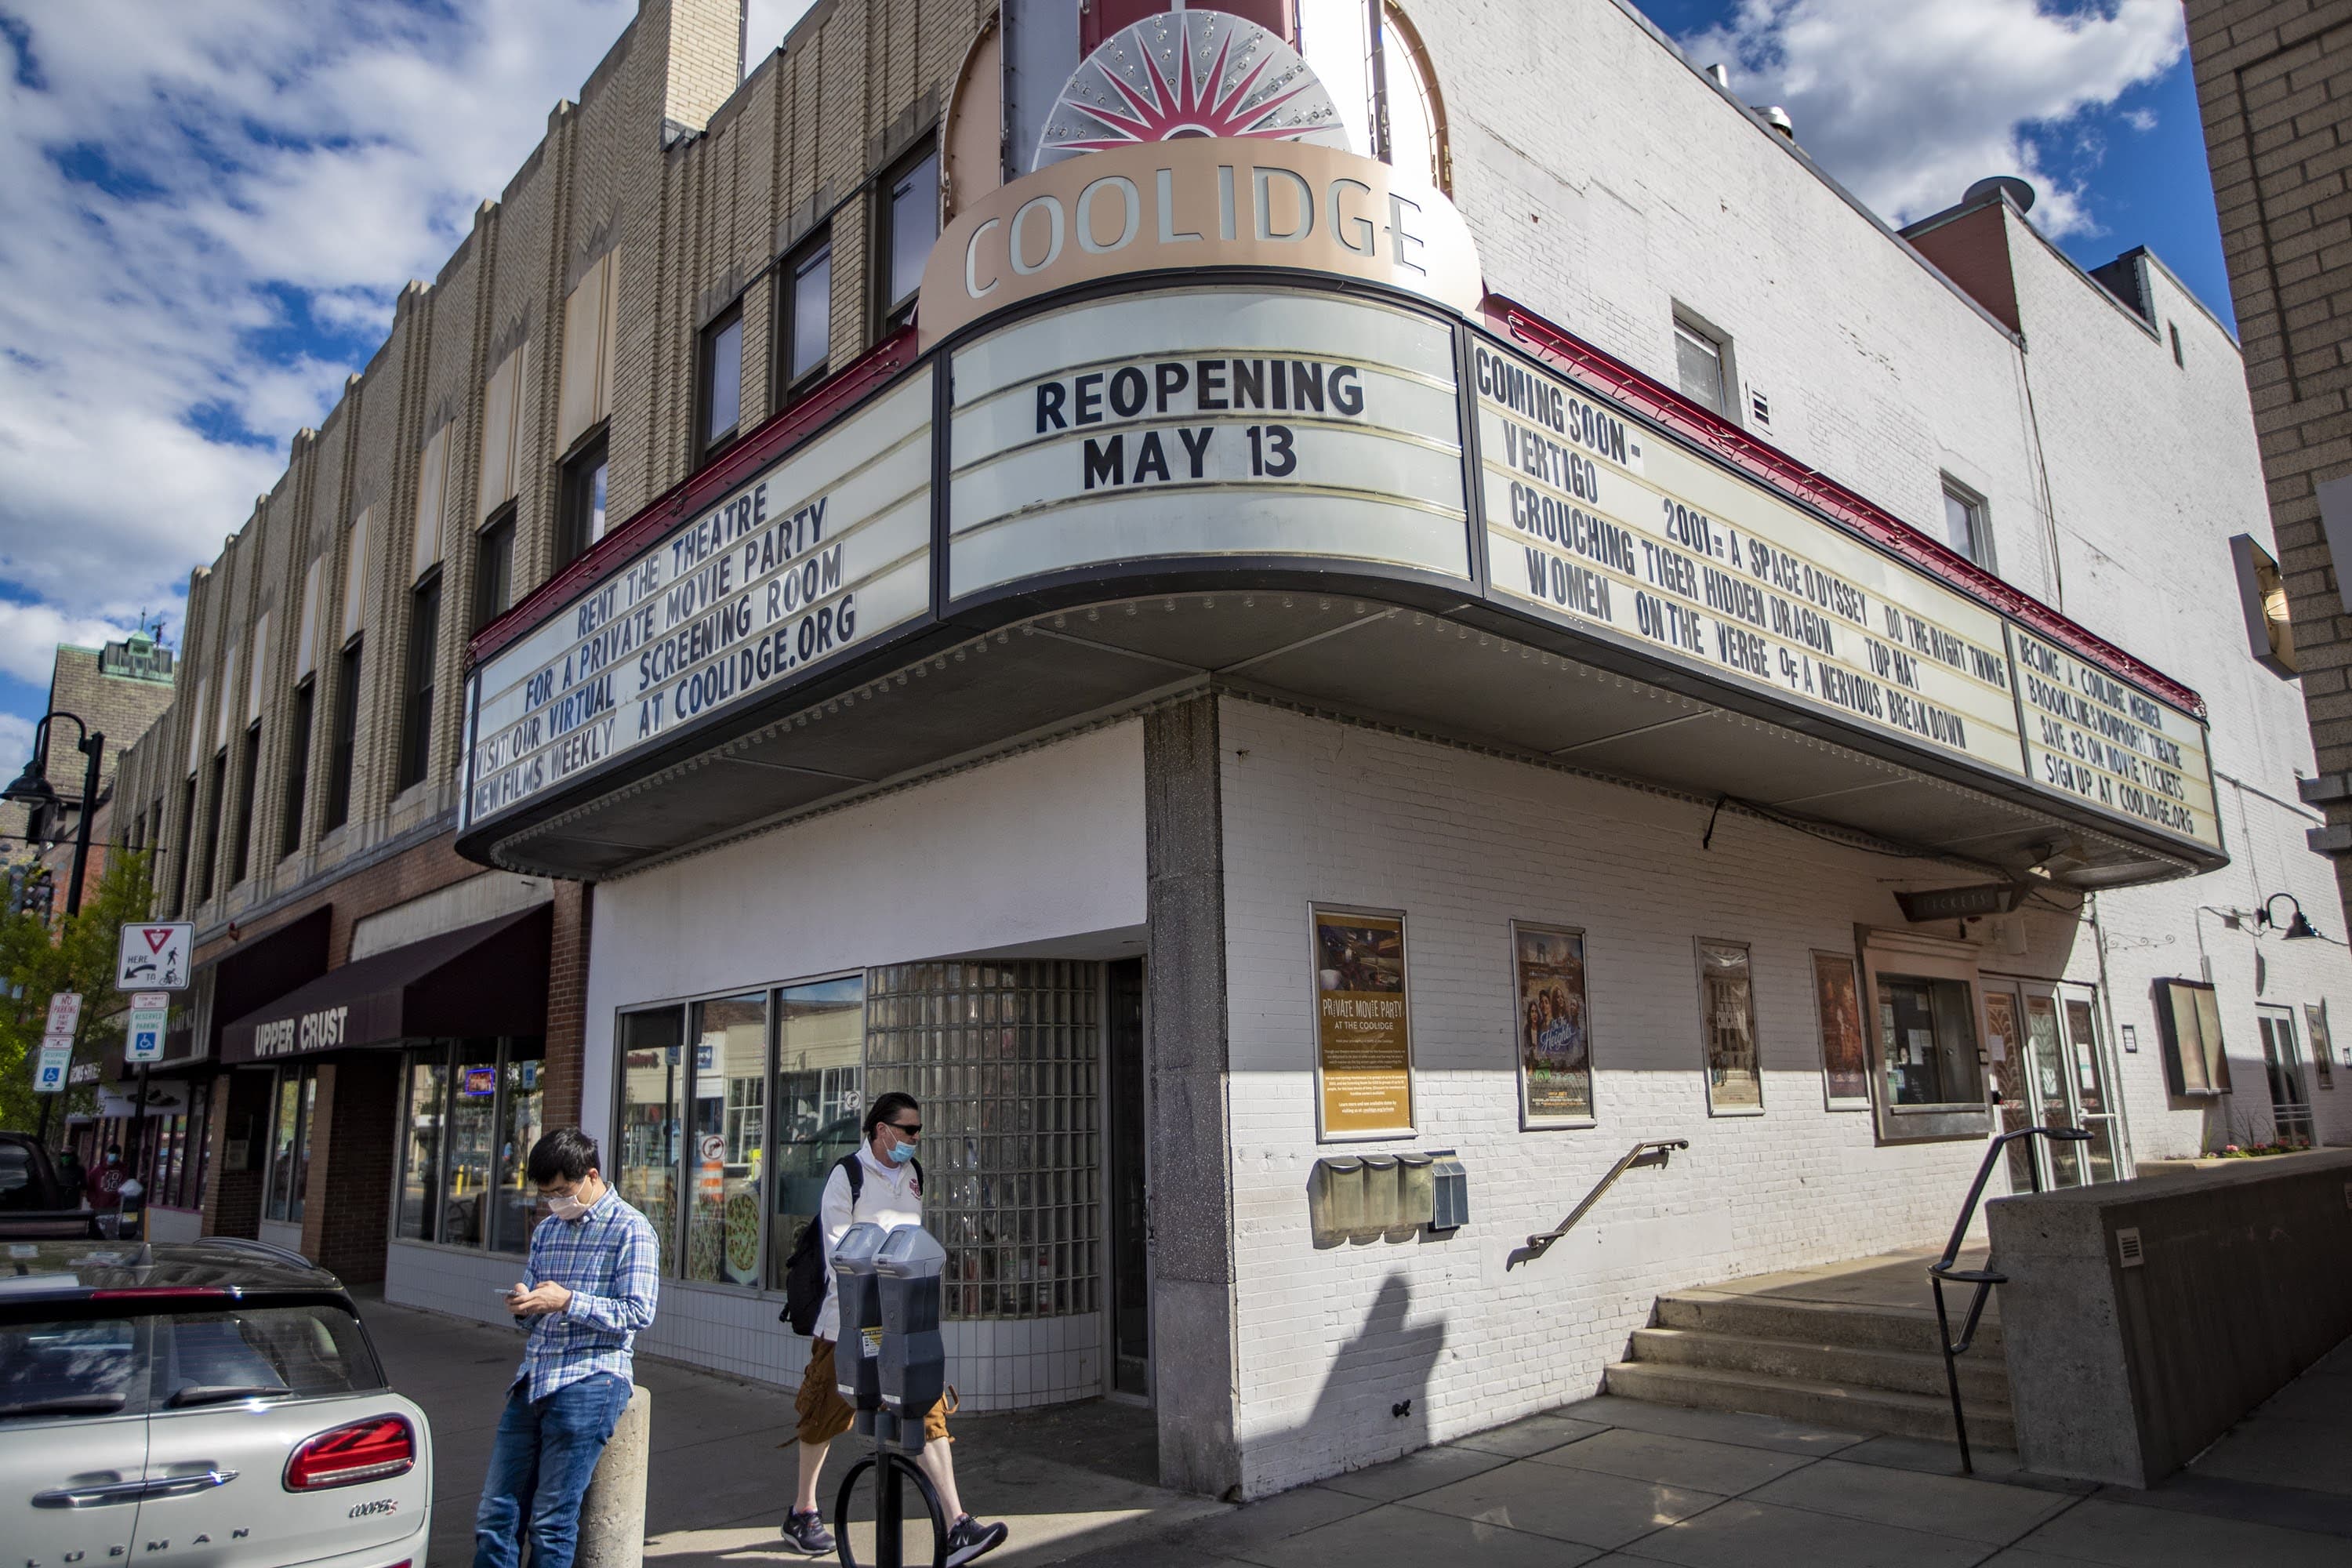 The marquee of the Coolidge Corner Theater annouces their reopening on May 13 after being closed to the public for 14 months due to the pandemic. (Jesse Costa/WBUR)